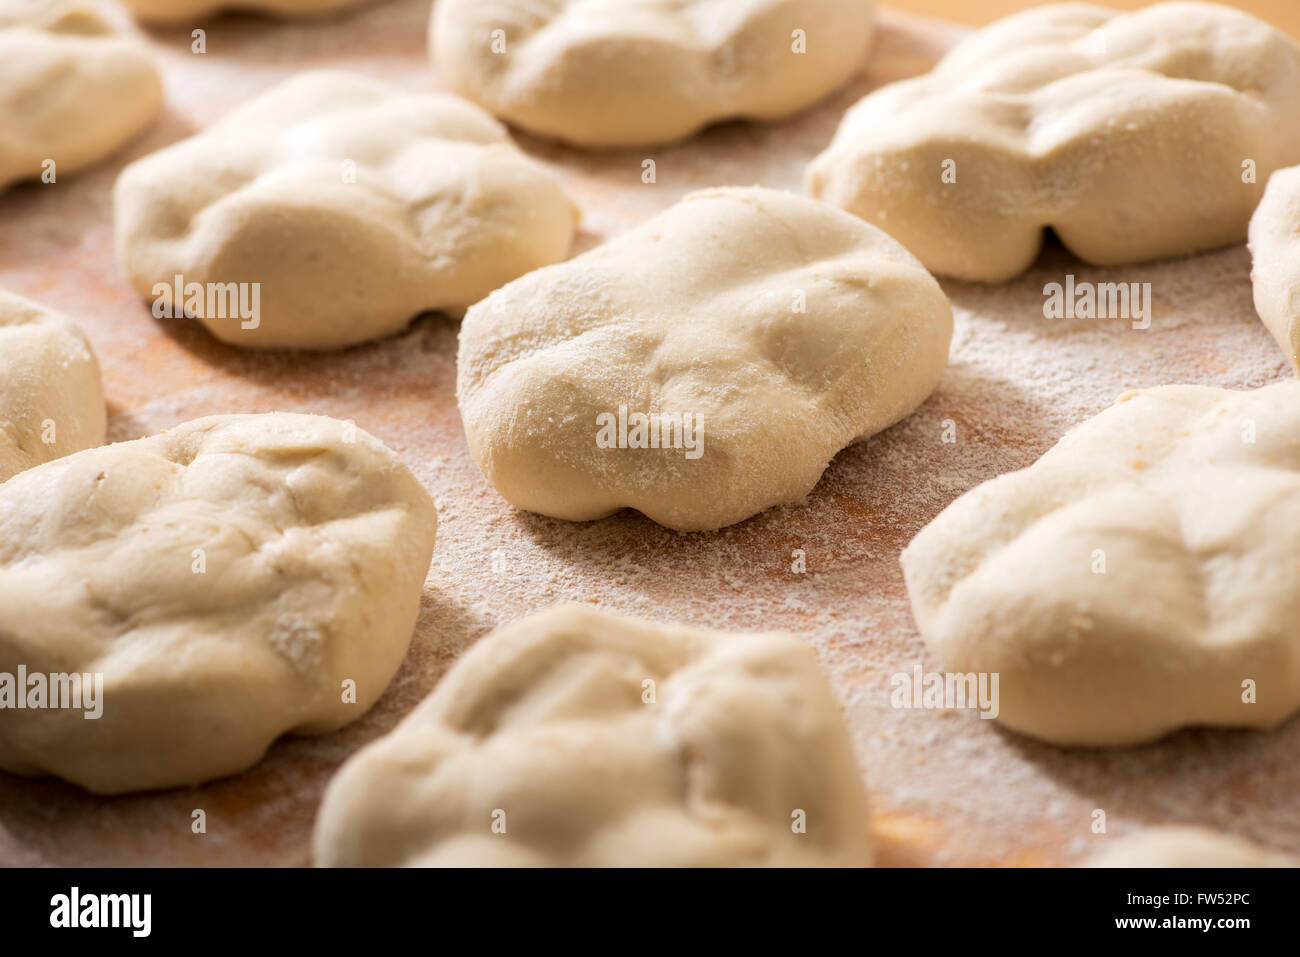 Fresh loaves of bread with specialist shapes laid out on a floured wooden bakery table, close up view with selective focus Stock Photo